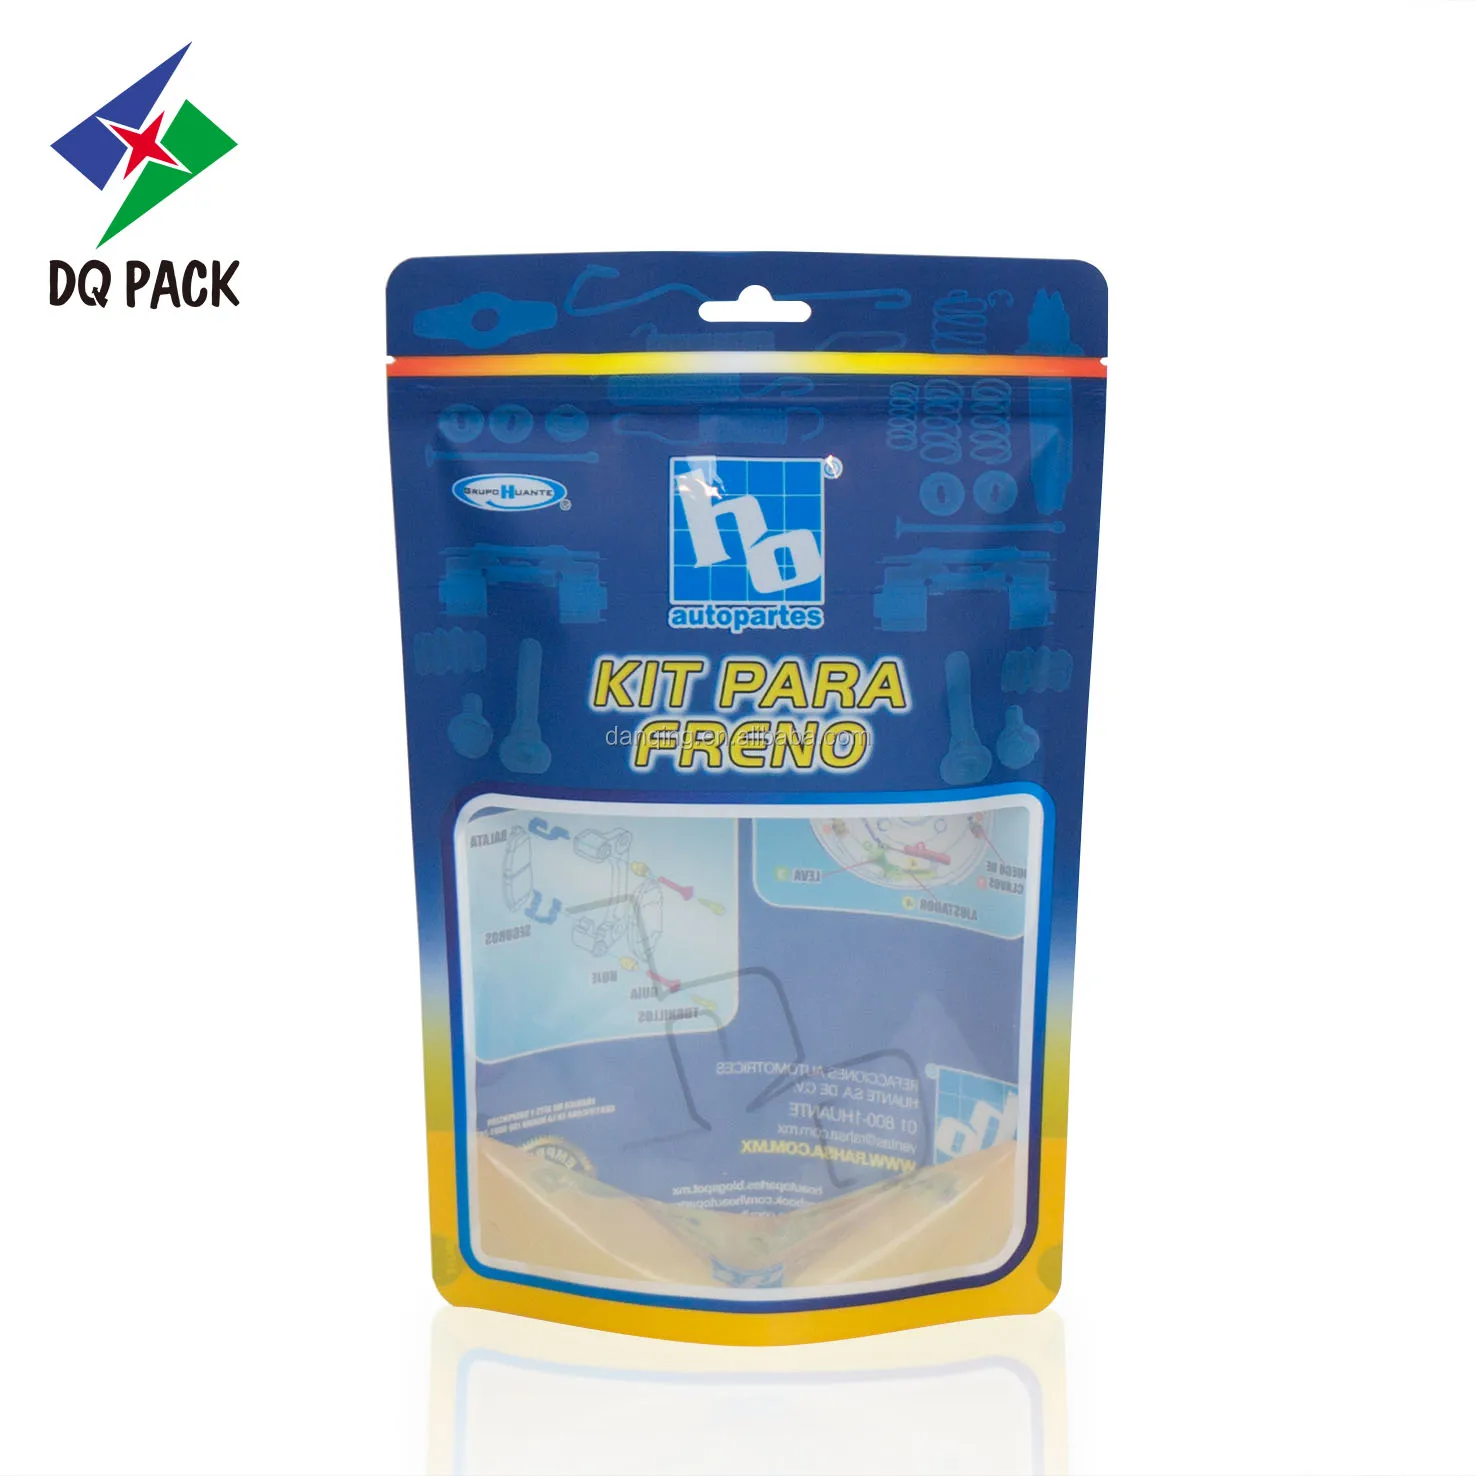 DQ PACK Alox PET Soup Retort Stand Up Pouch With Window